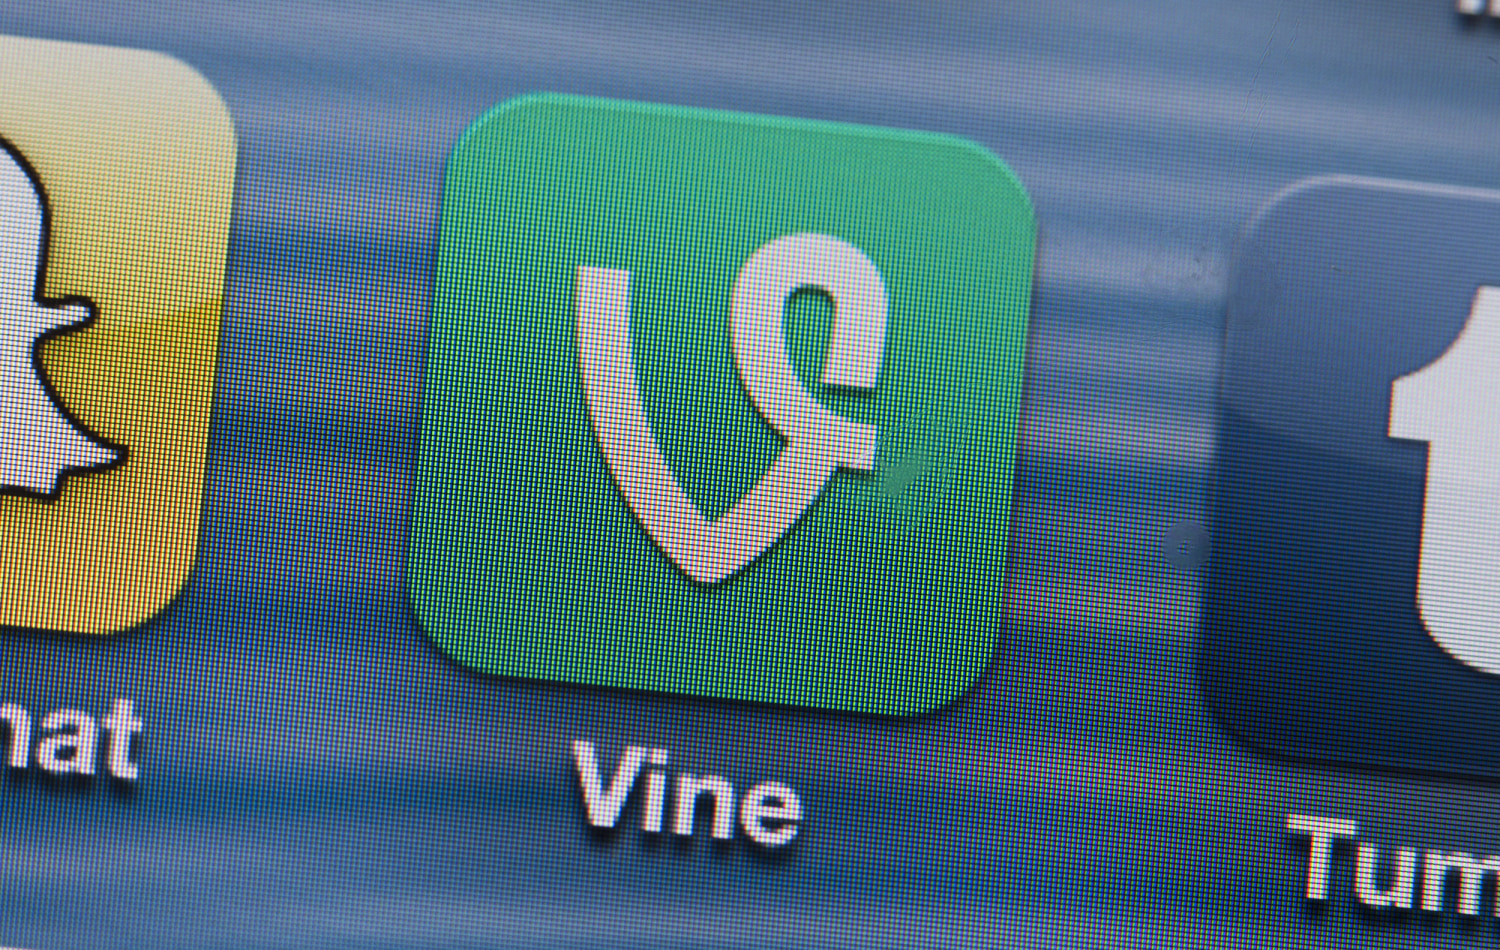 Sour Grapes? Twitter Axes Vine, Its Ill-Fated Video App